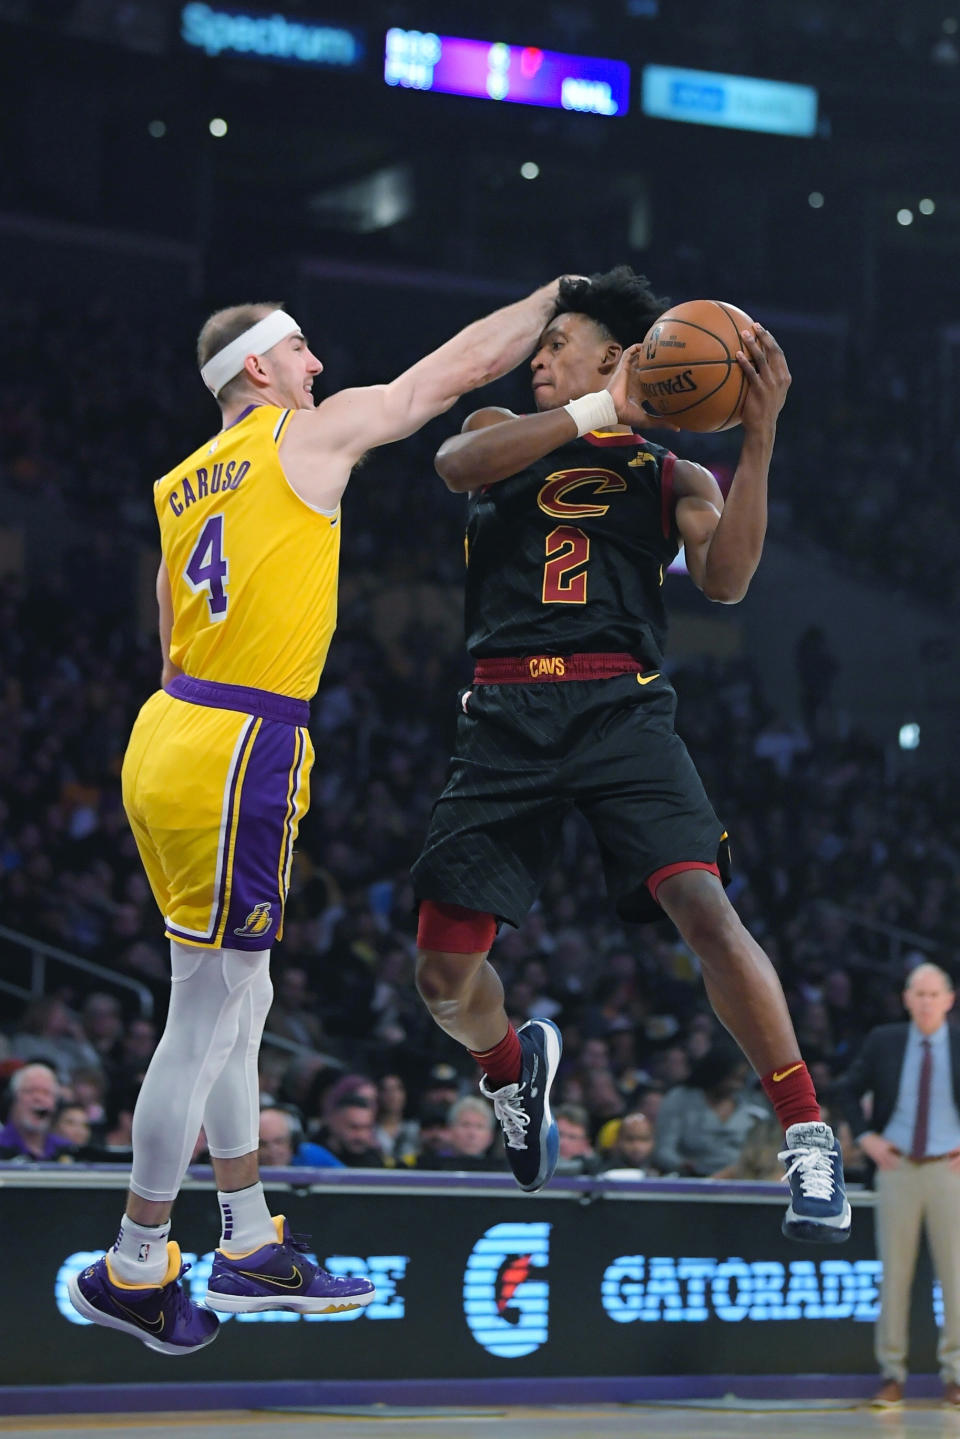 Cleveland Cavaliers guard Kevin Porter Jr., right, shoots as Los Angeles Lakers guard Alex Caruso defends during the first half of an NBA basketball game Monday, Jan. 13, 2020, in Los Angeles. (AP Photo/Mark J. Terrill)